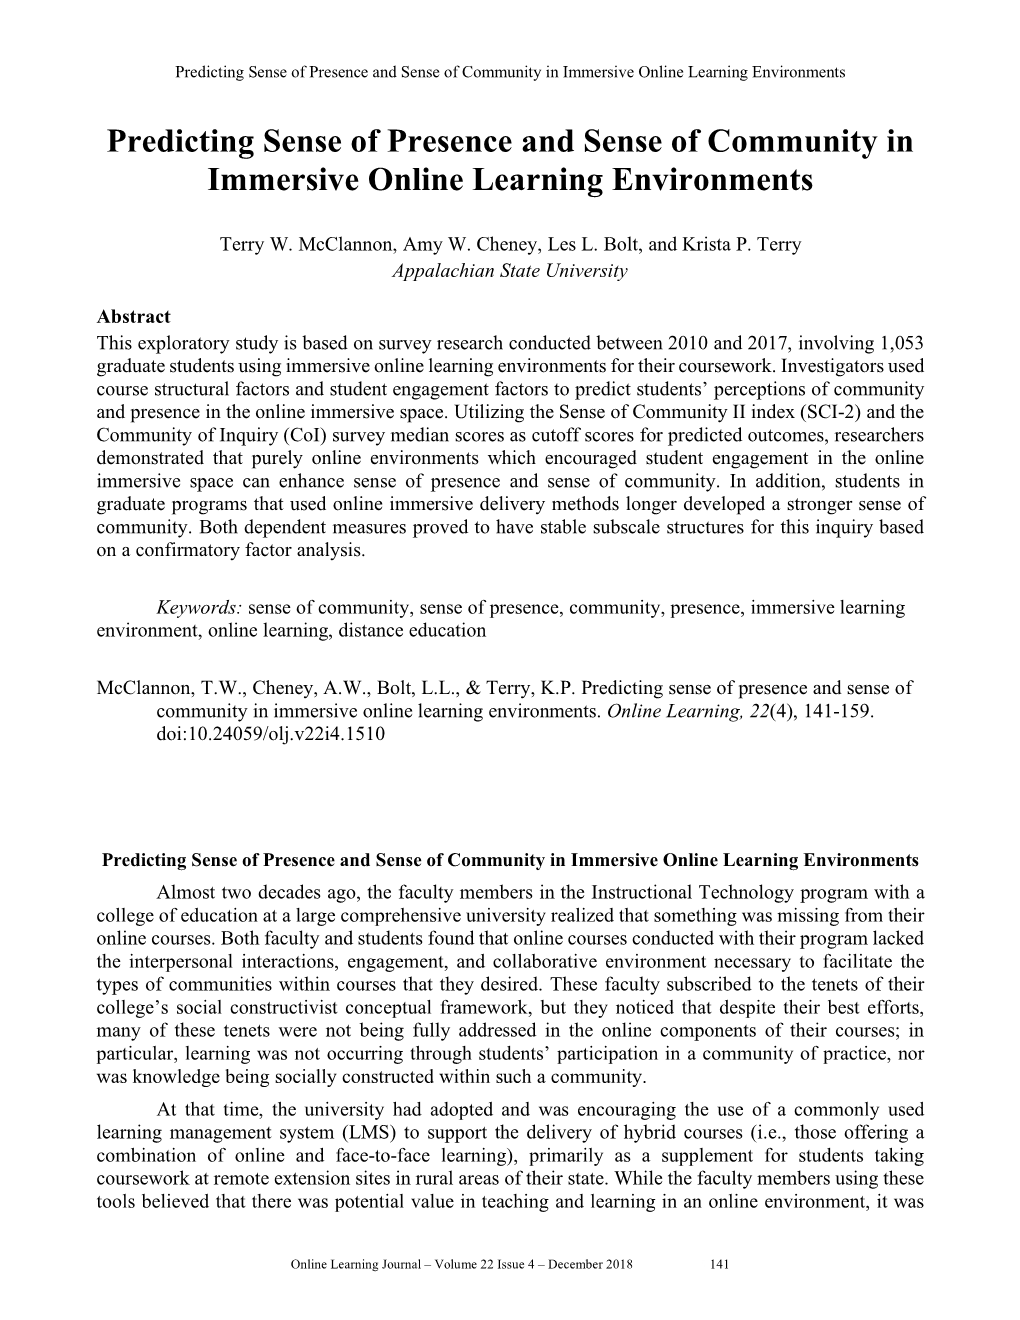 Predicting Sense of Presence and Sense of Community in Immersive Online Learning Environments